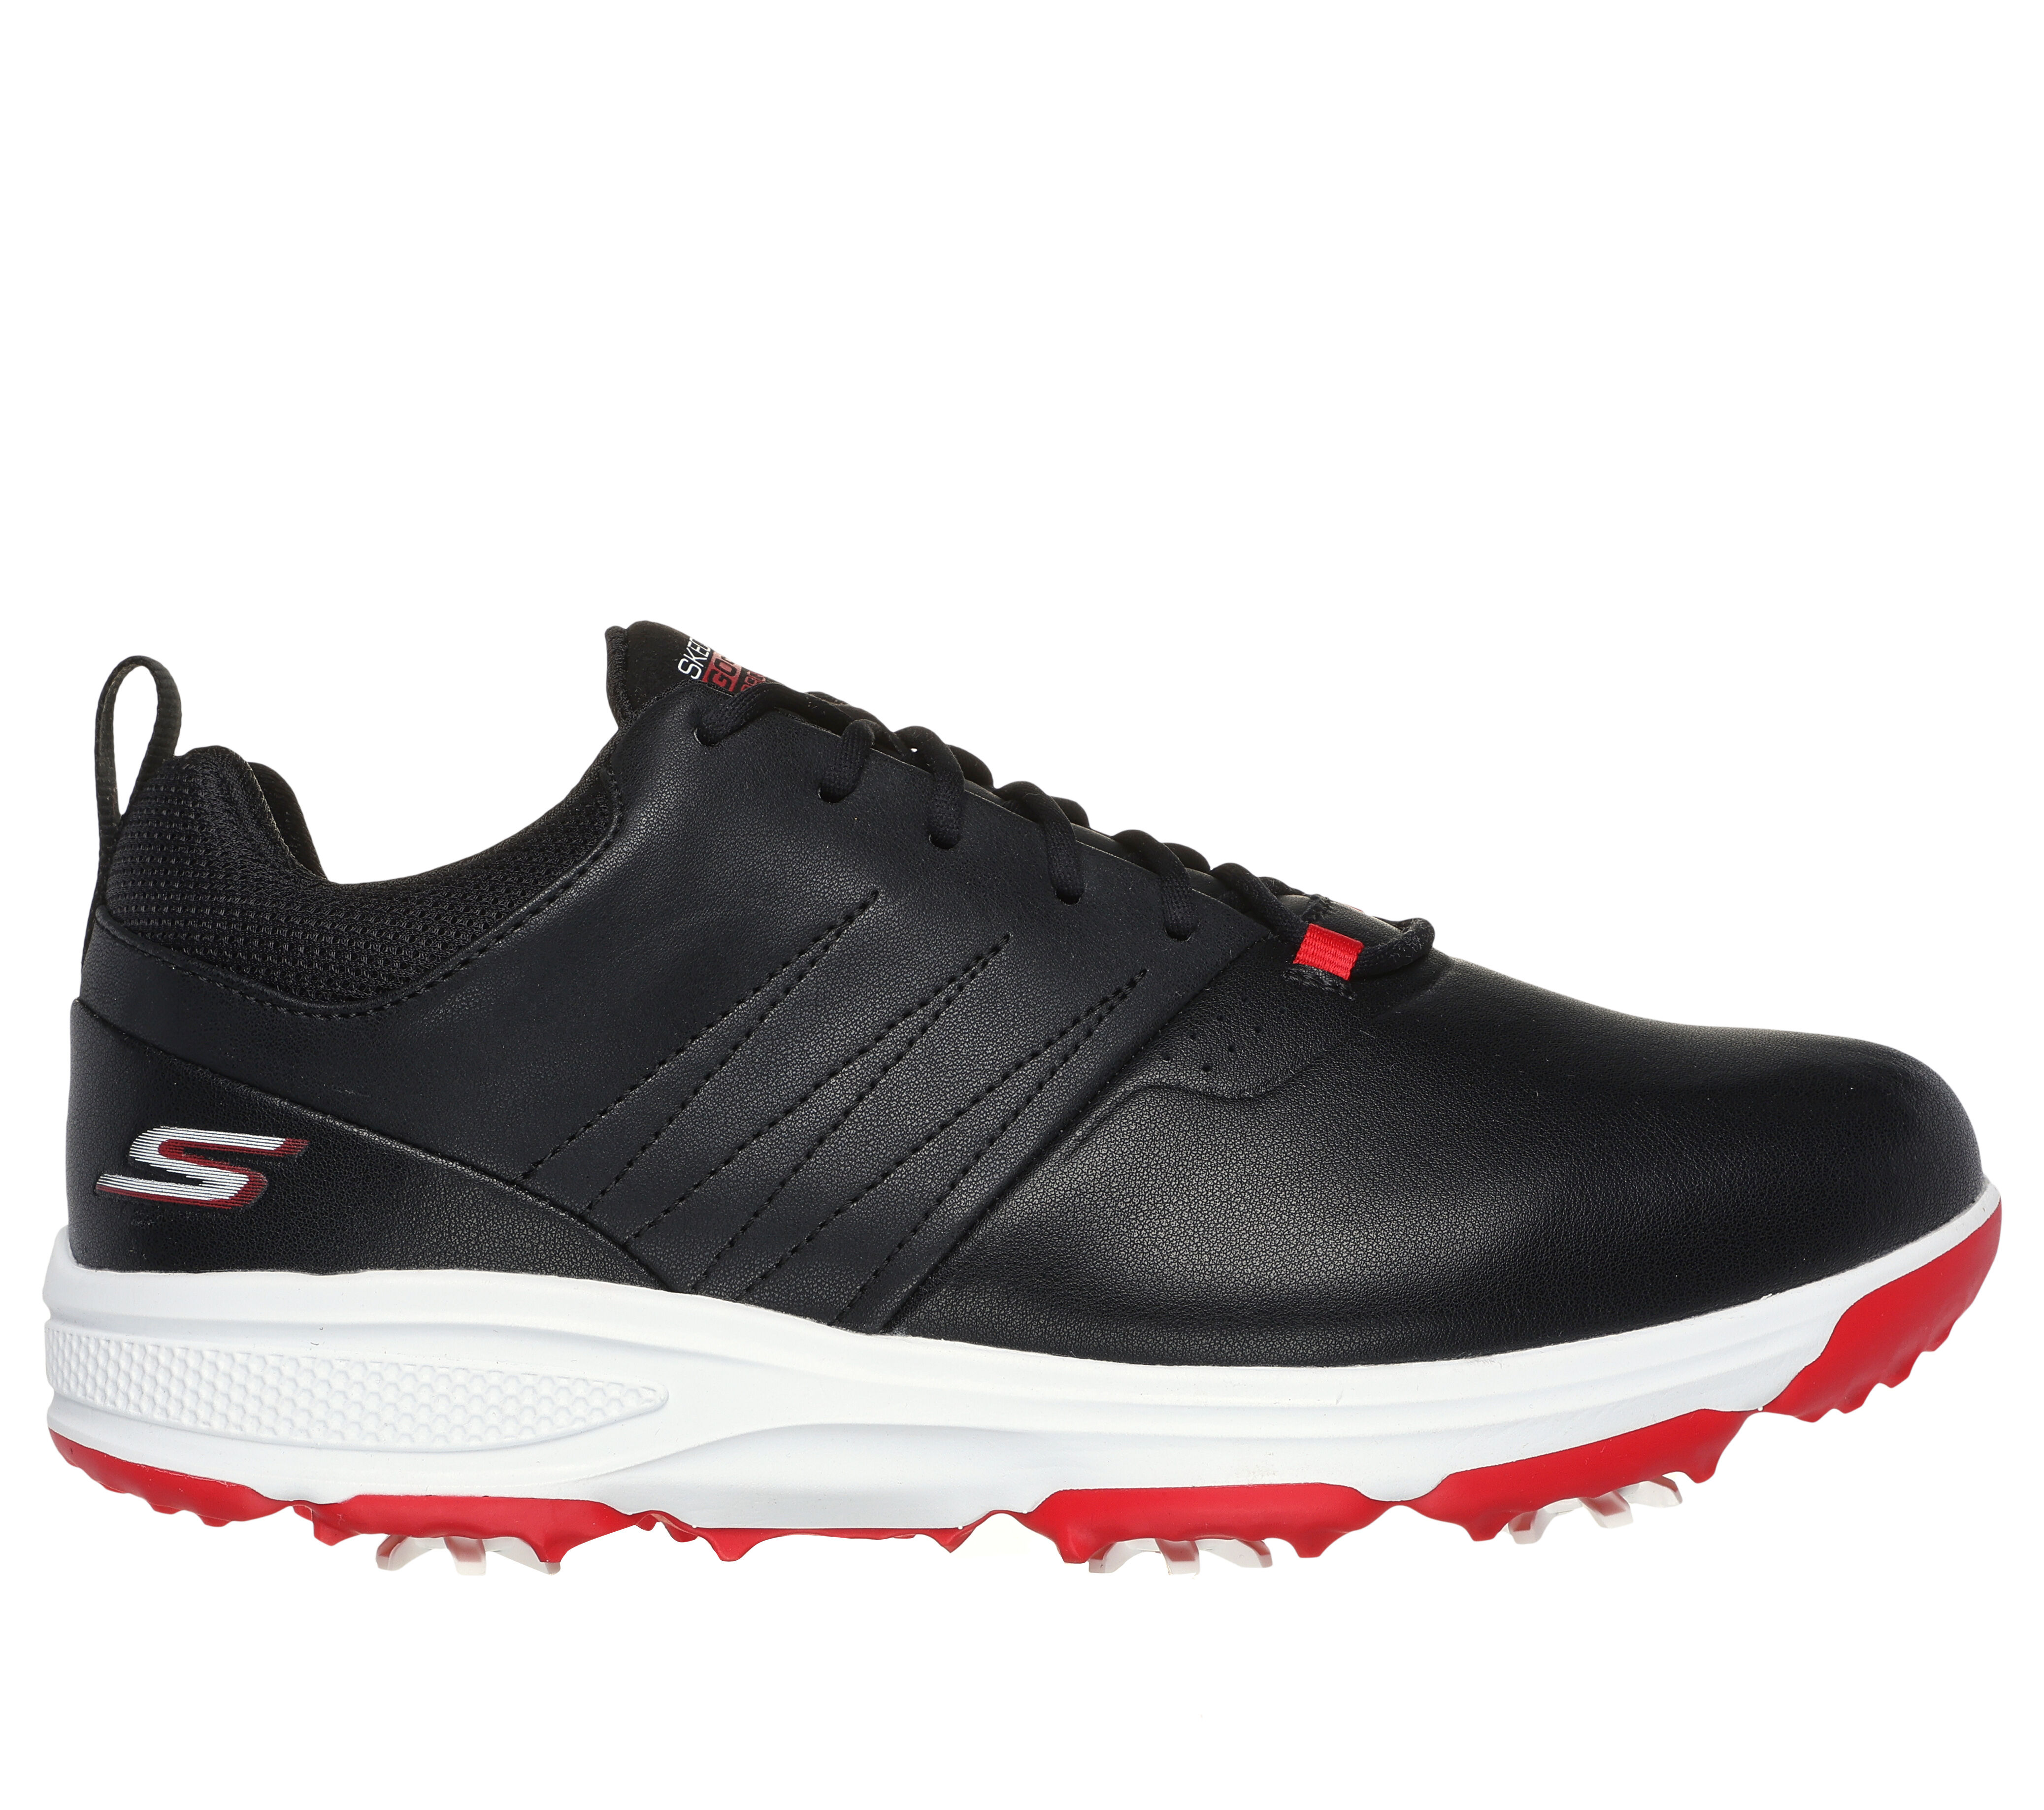 skechers golf shoes outlet